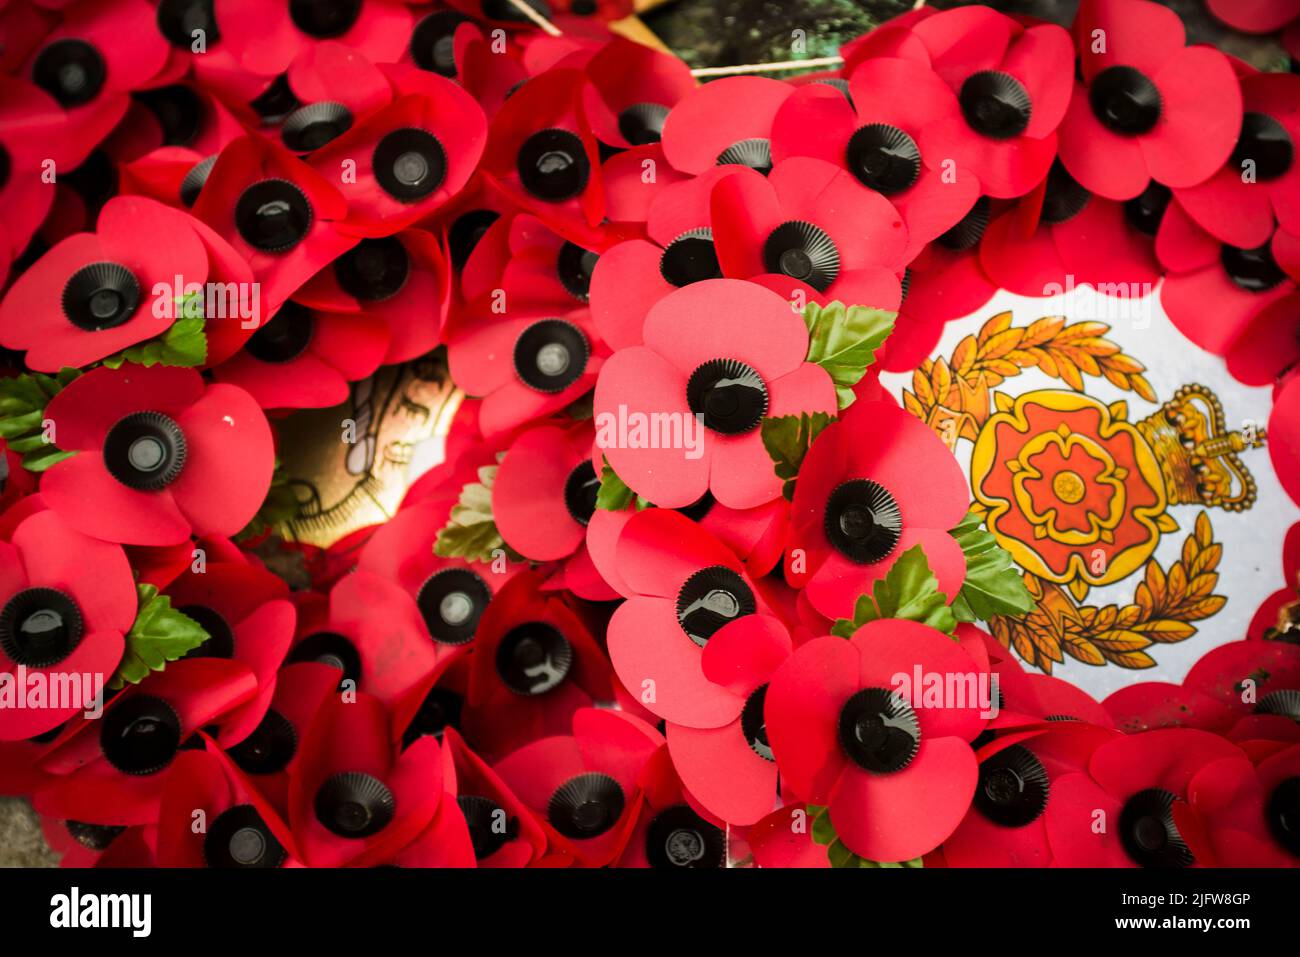 Red poppy wreaths in Exchange Flags, Liverpool, Merseyside, Lancashire, England, United Kingdom Stock Photo